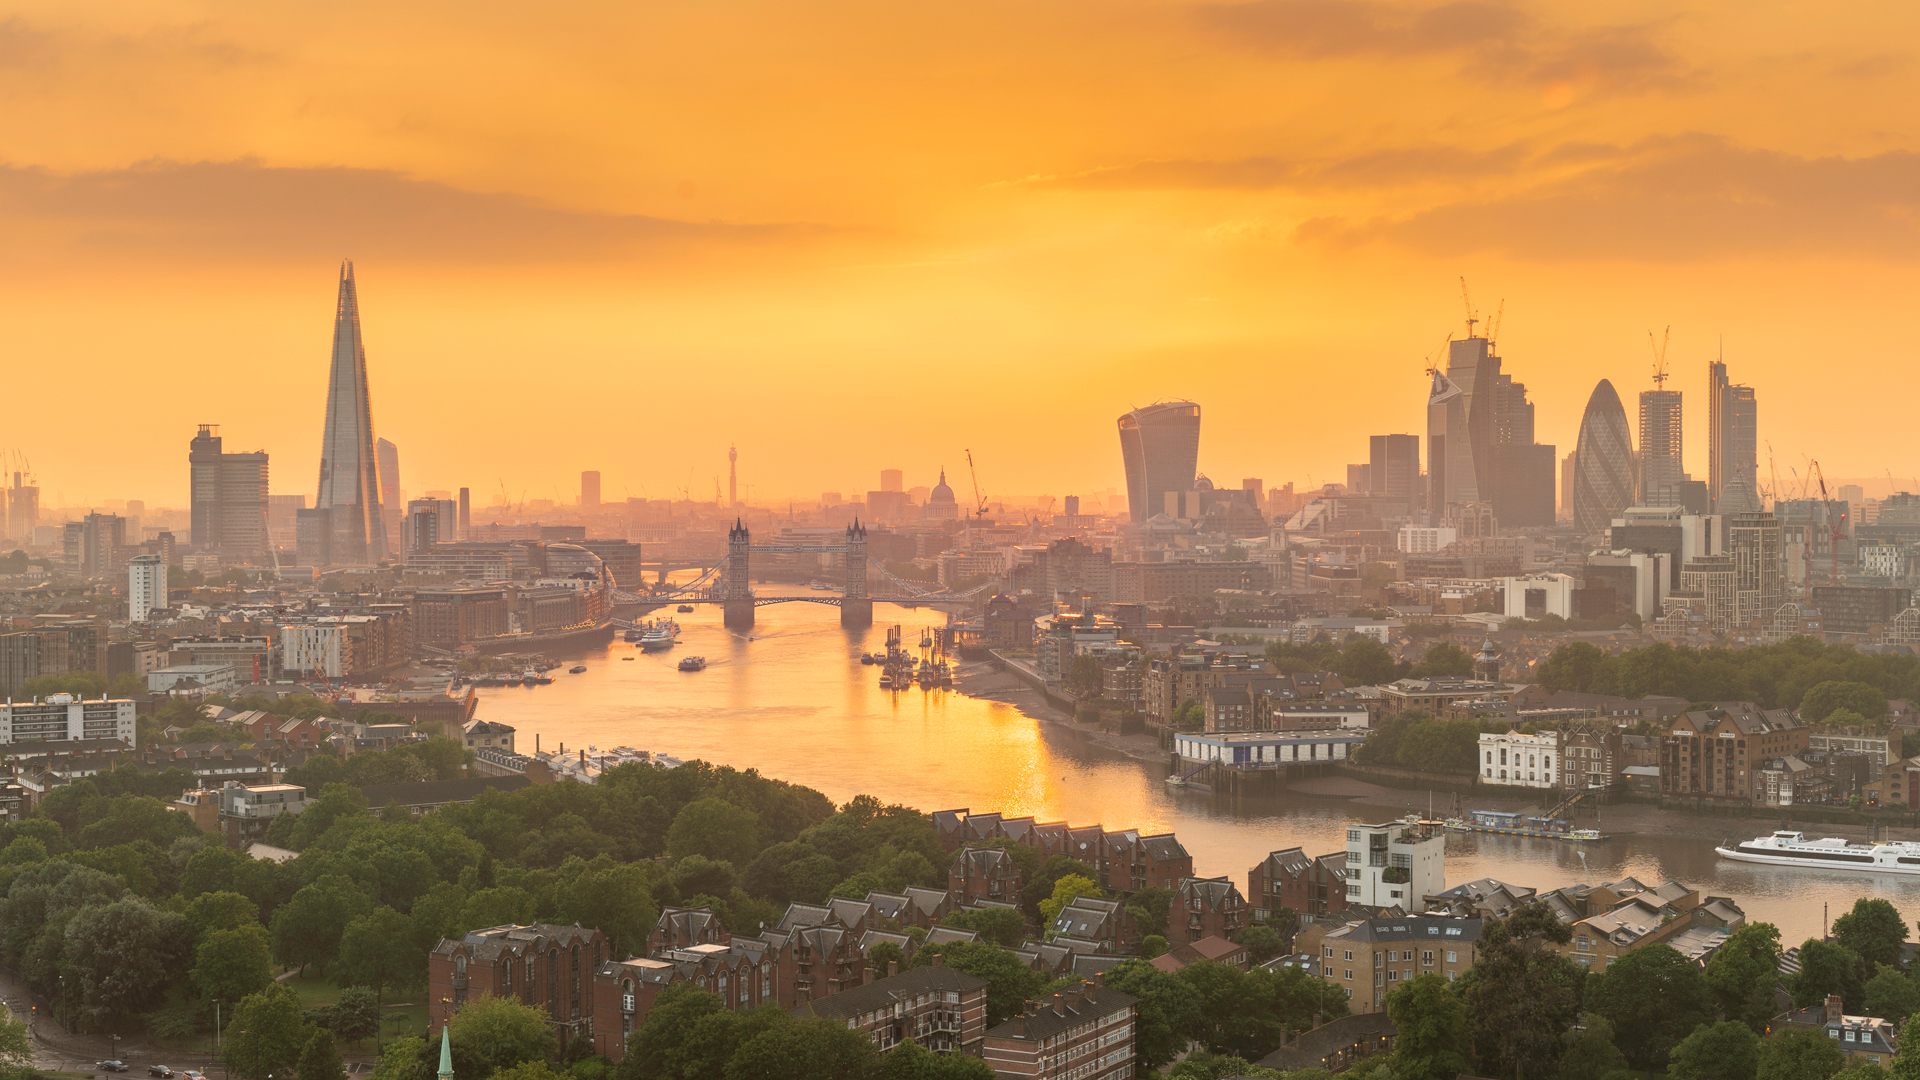 Sunset over the river Thames with orange tones and the city's skyscrapers in the background including The Shard 